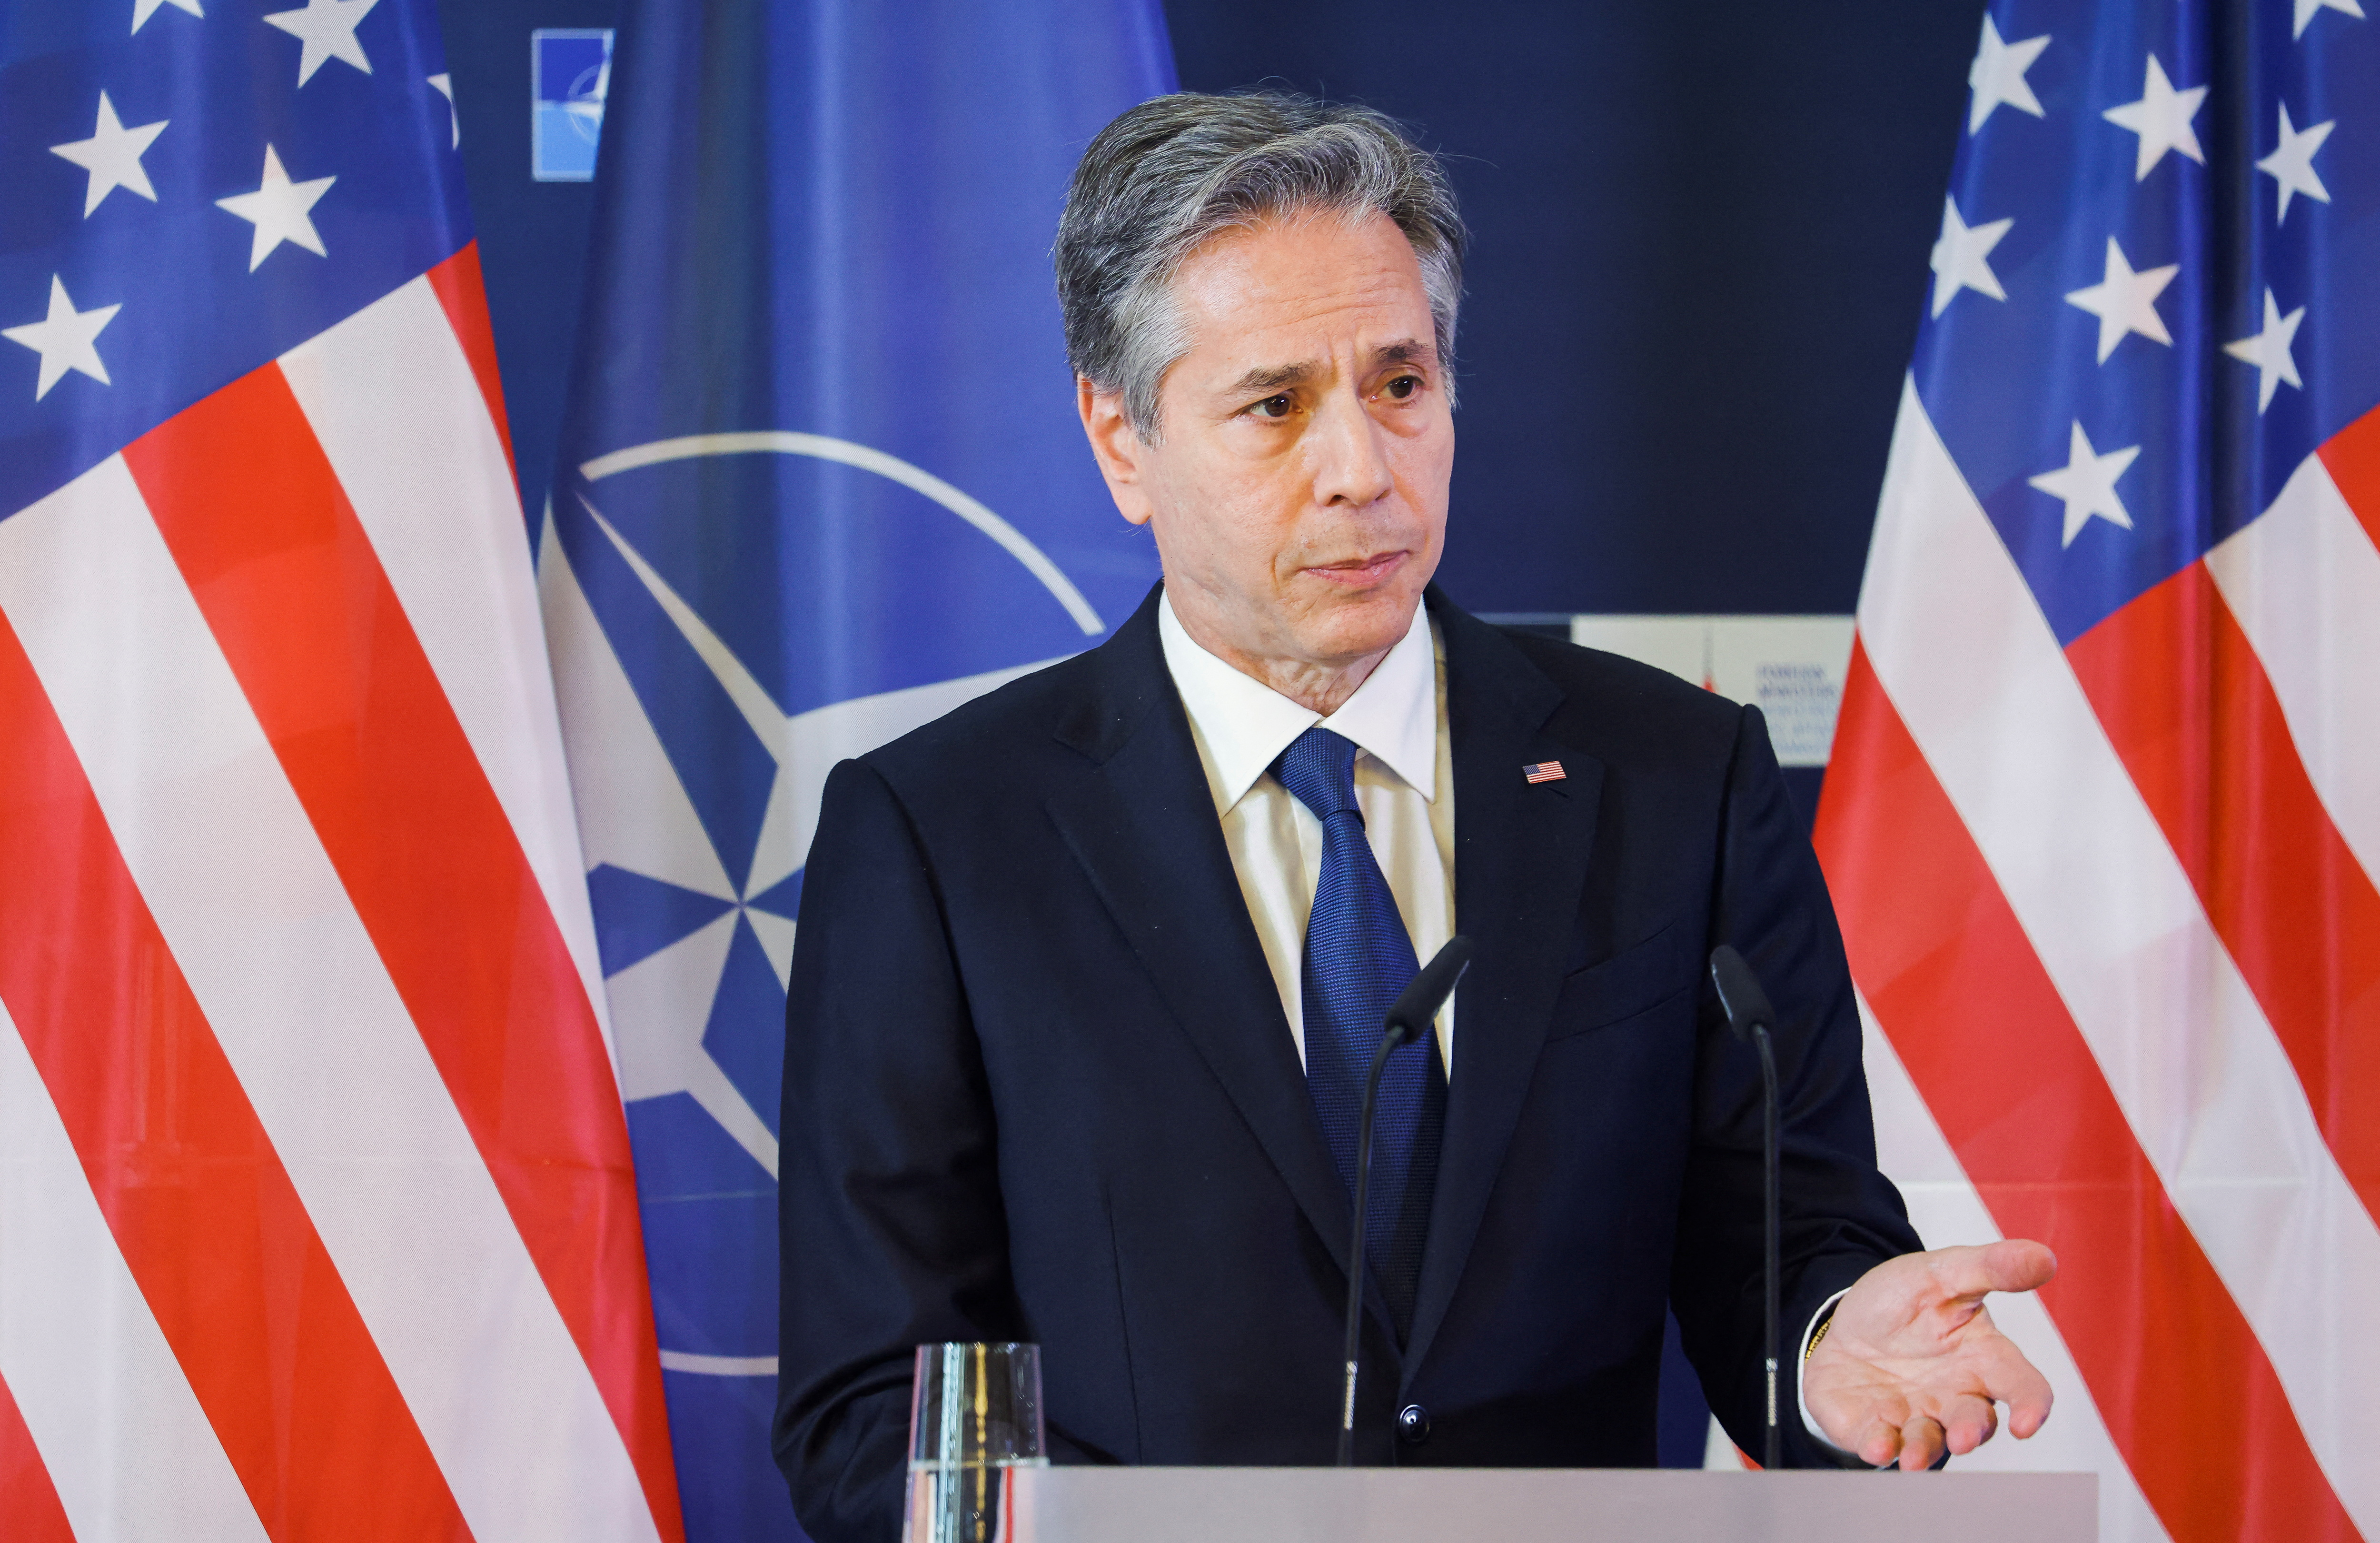 NATO foreign ministers meeting, in Berlin